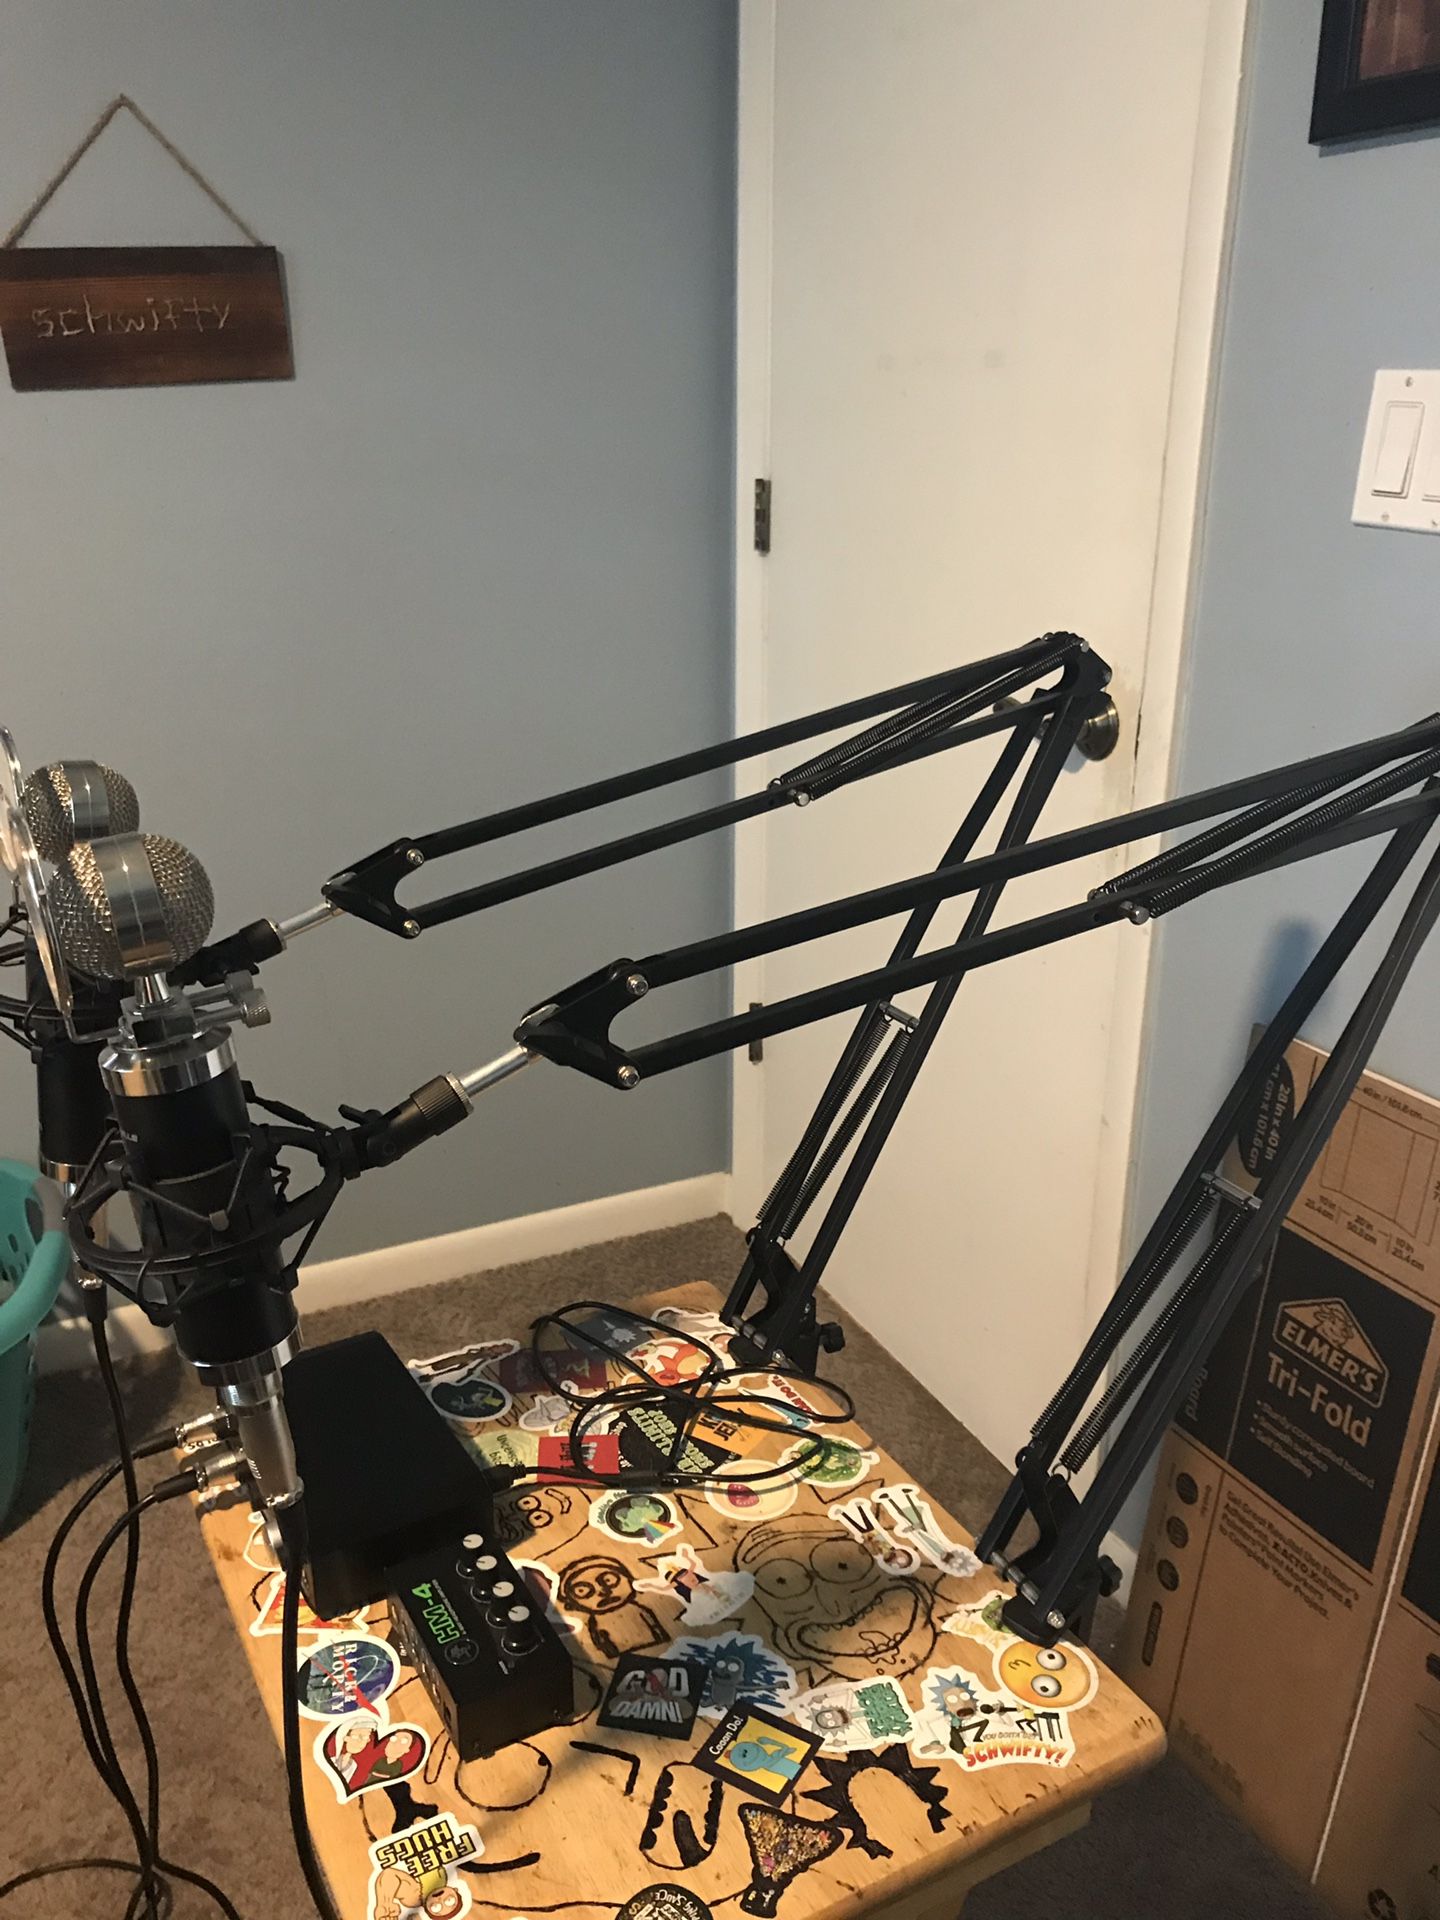 Complete podcast setup: microphones, arms, amp, driver, headphones, and laptop cooling station